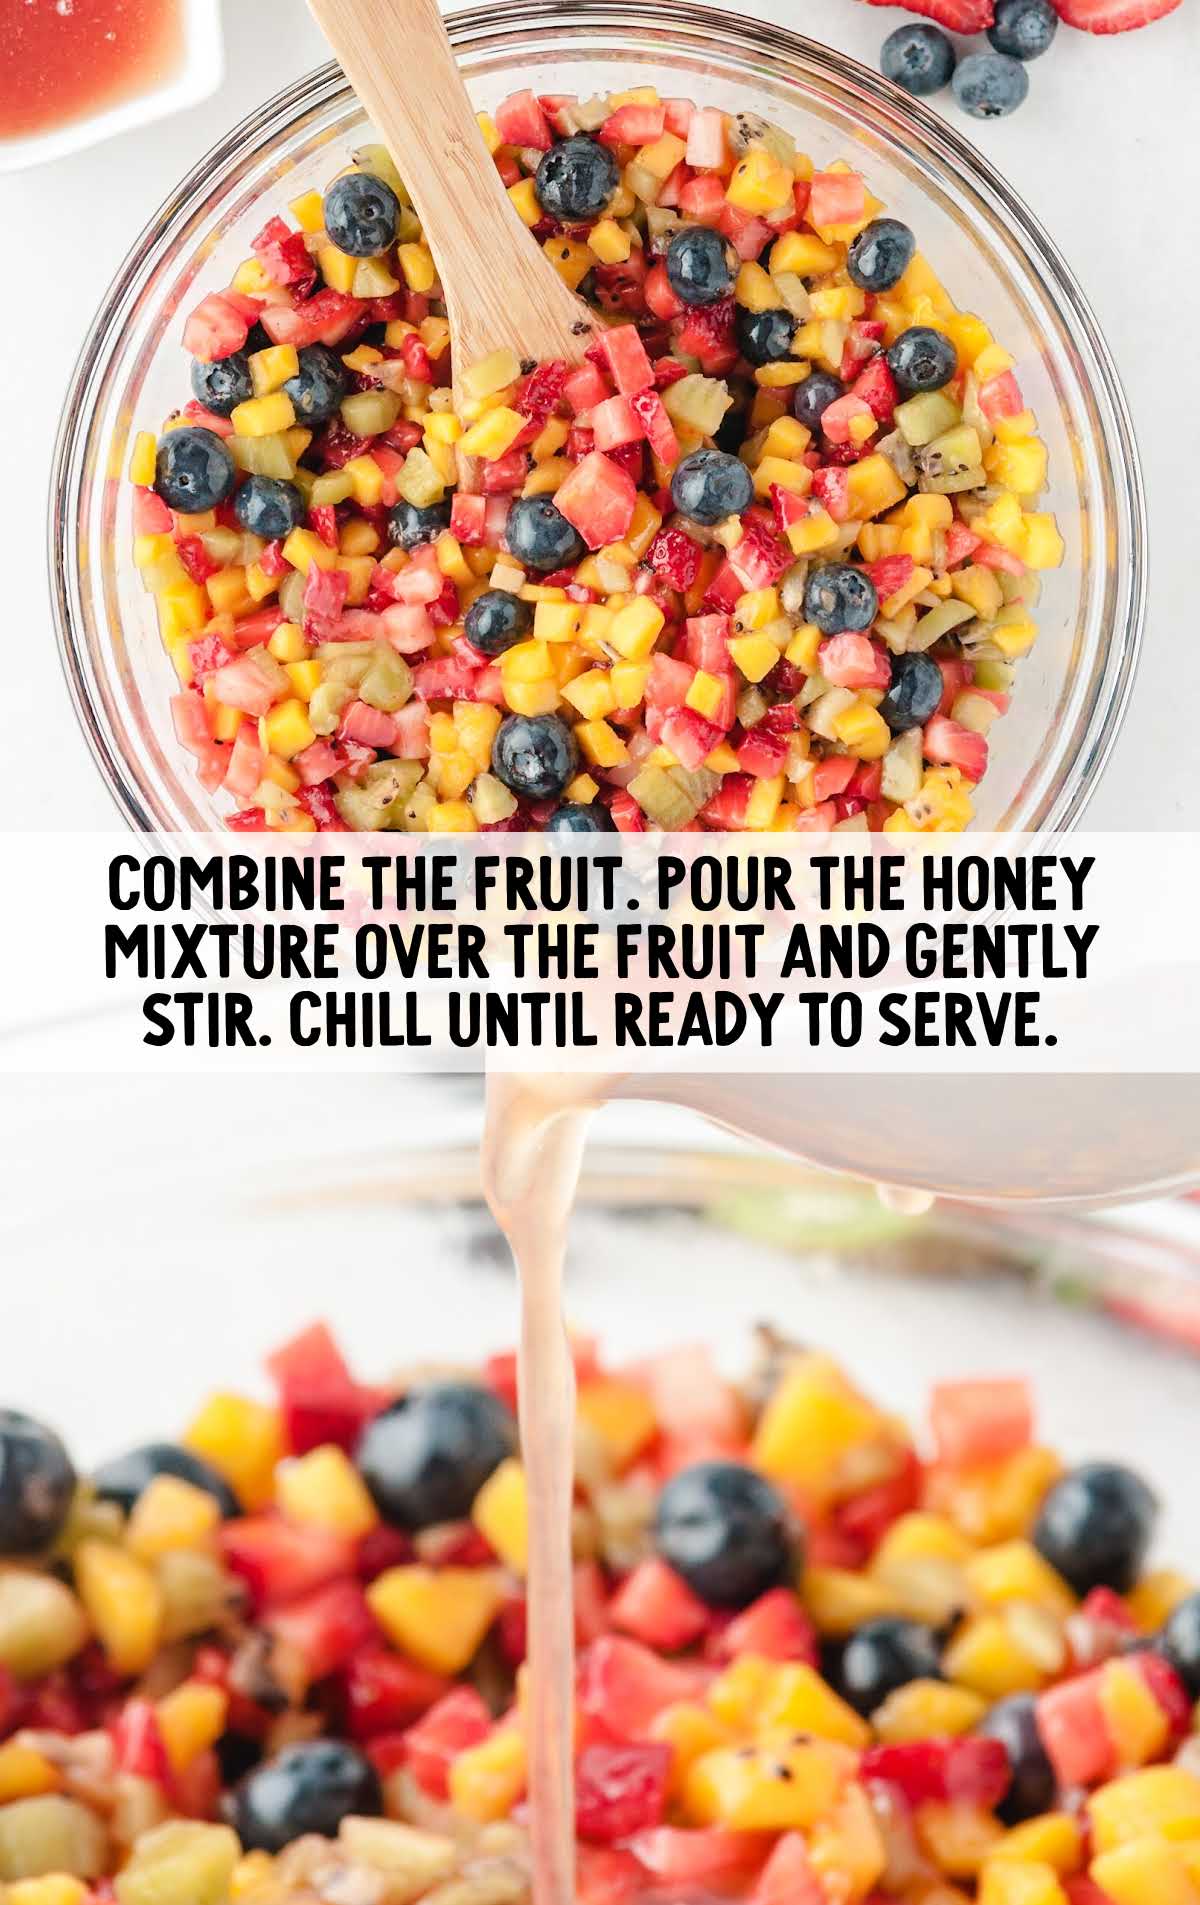 fruits combined and honey mixture poured over the fruits in a bowl